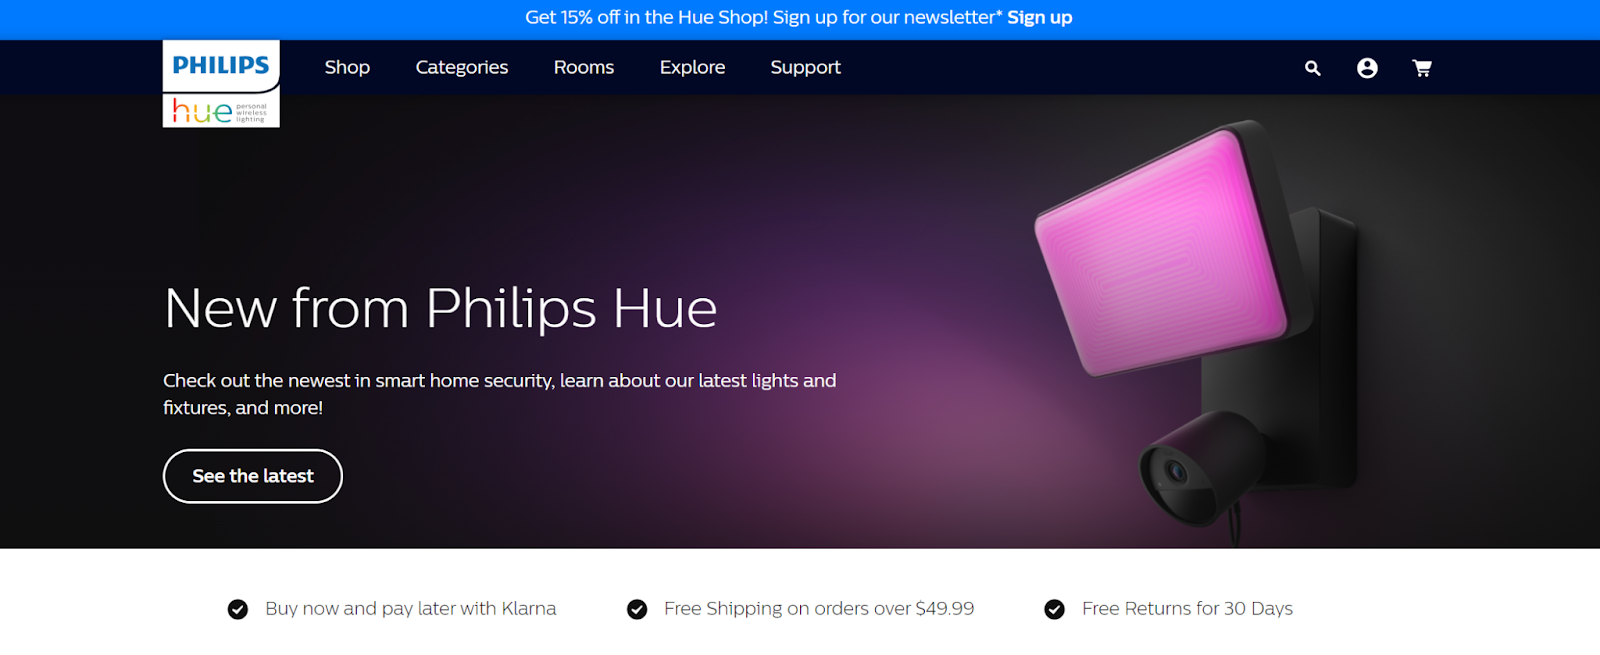 Philips Hue home page